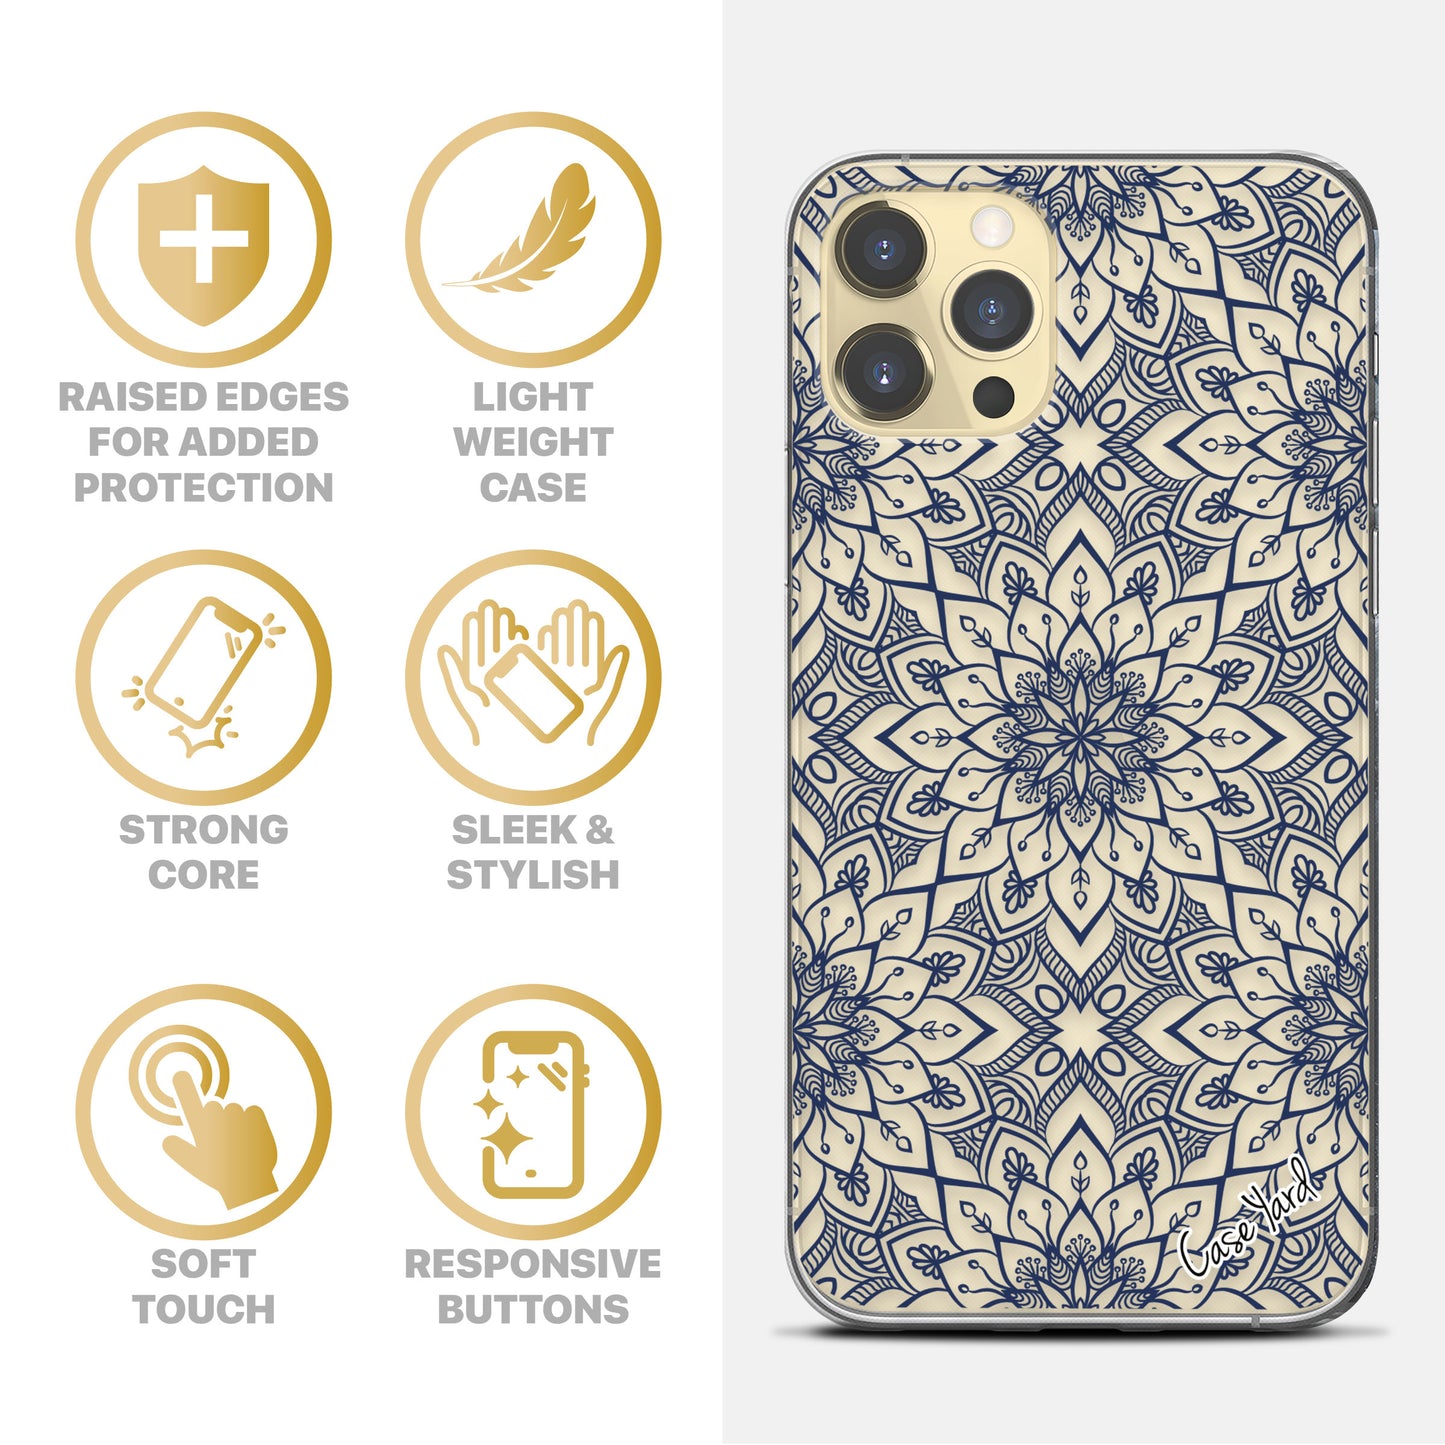 TPU Clear case with (Bohemian Tile) Design for iPhone & Samsung Phones